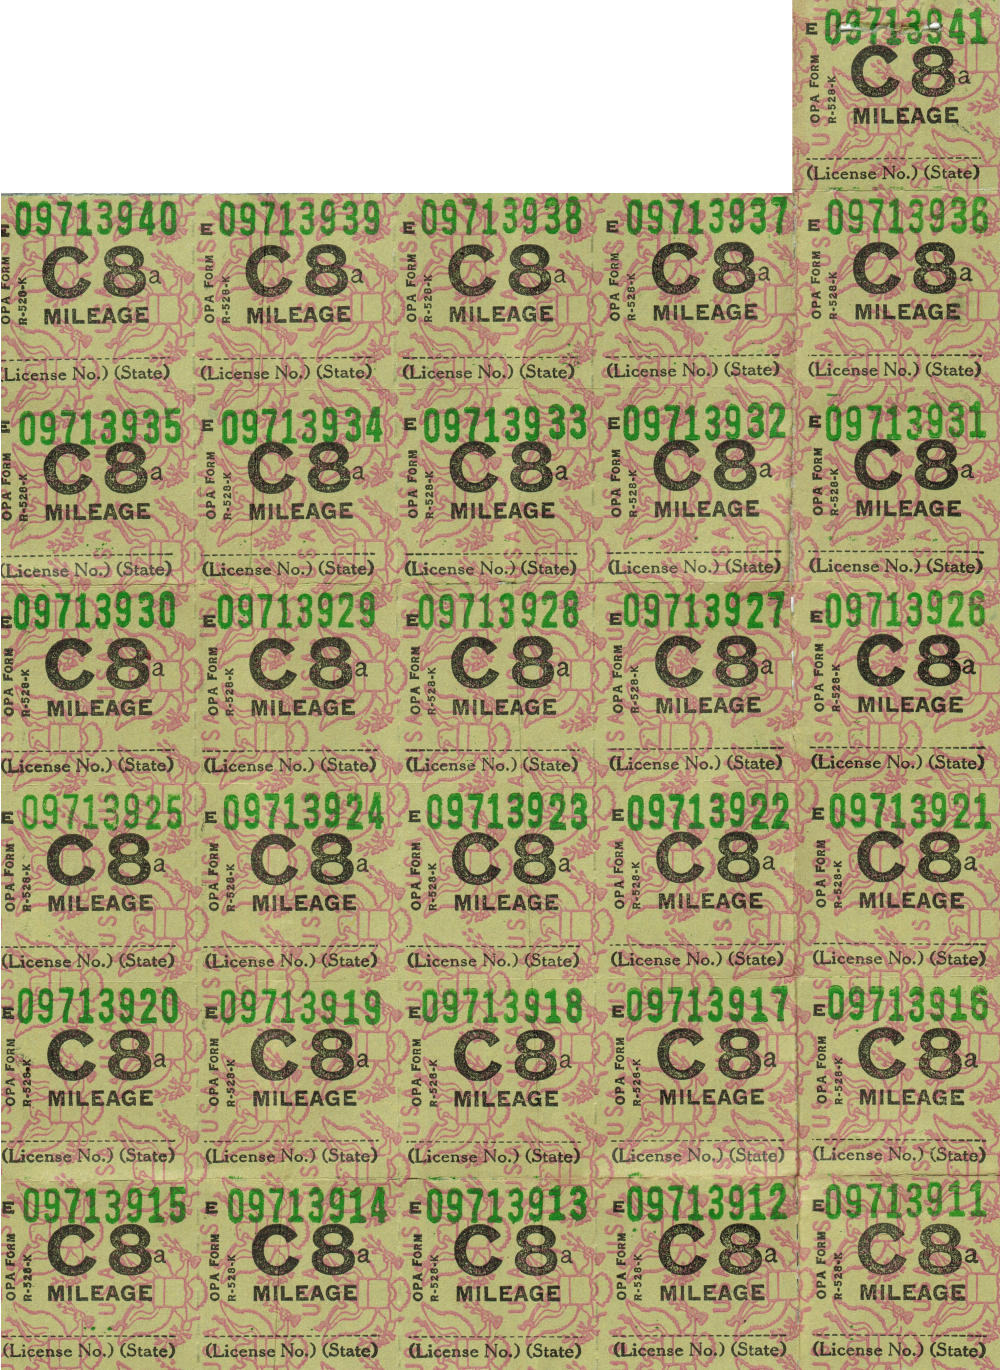 C Ration Stamps for Robert Strong Woodward's 1939 Chevrolet Woody Beachwagon 